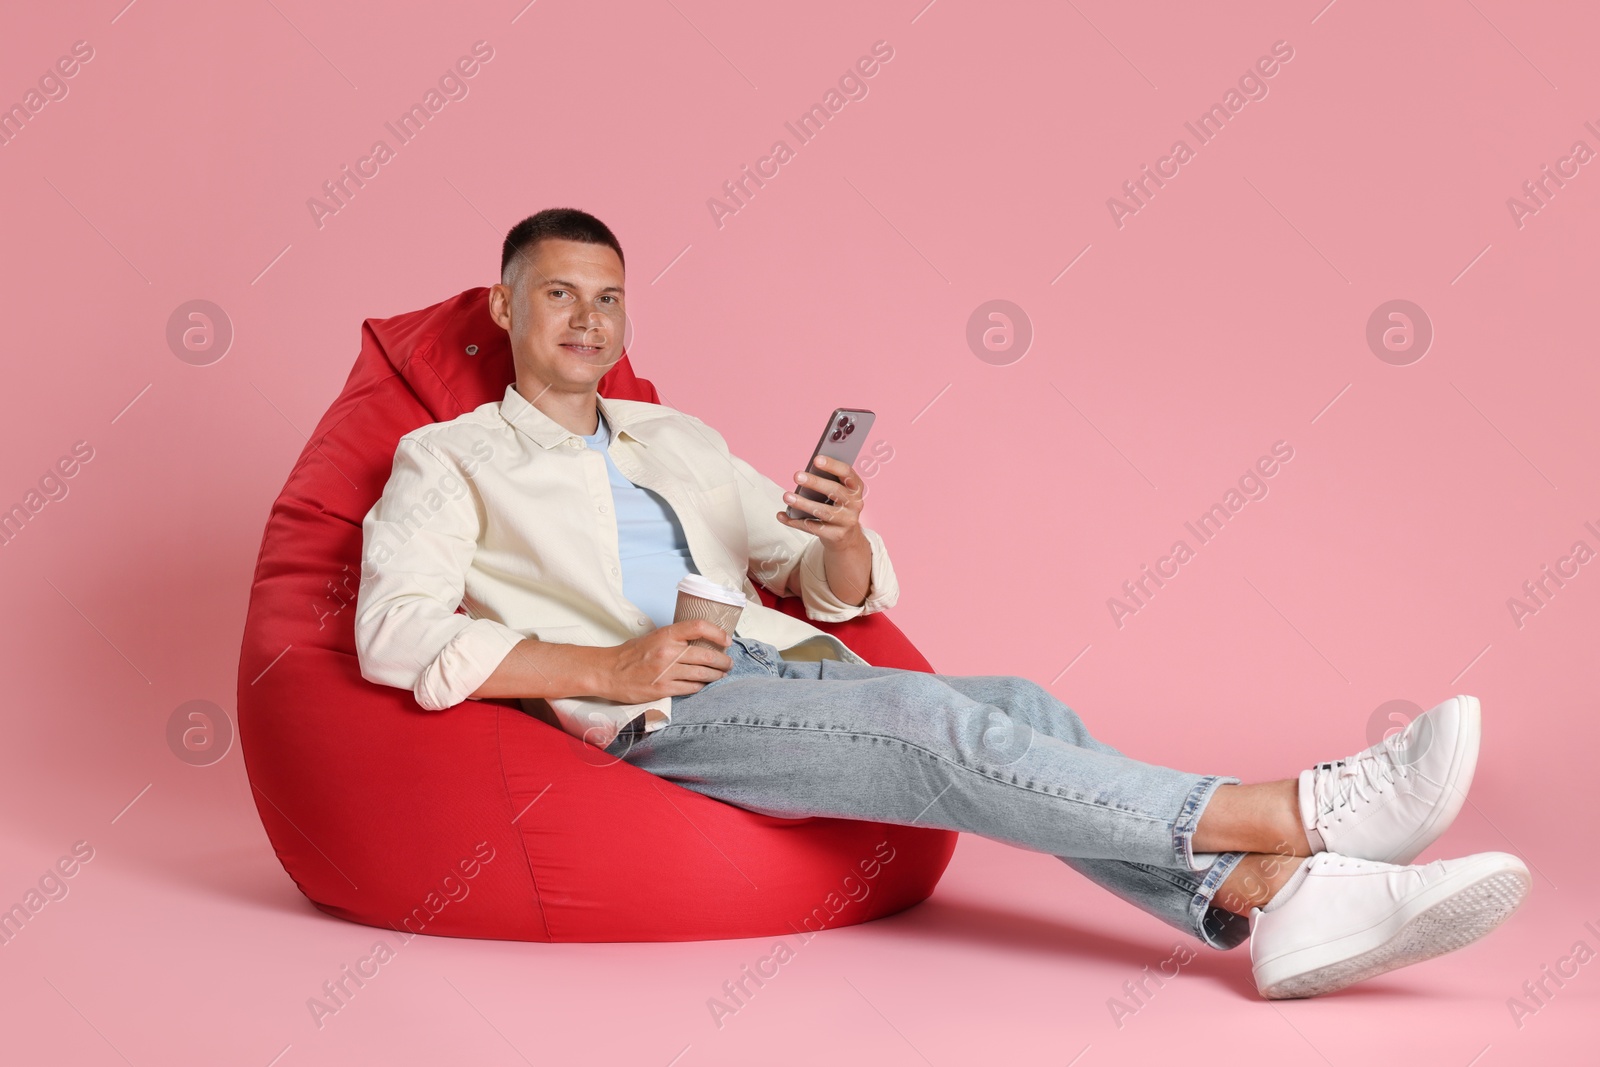 Photo of Happy man with smartphone and paper cup on red bean bag chair against pink background